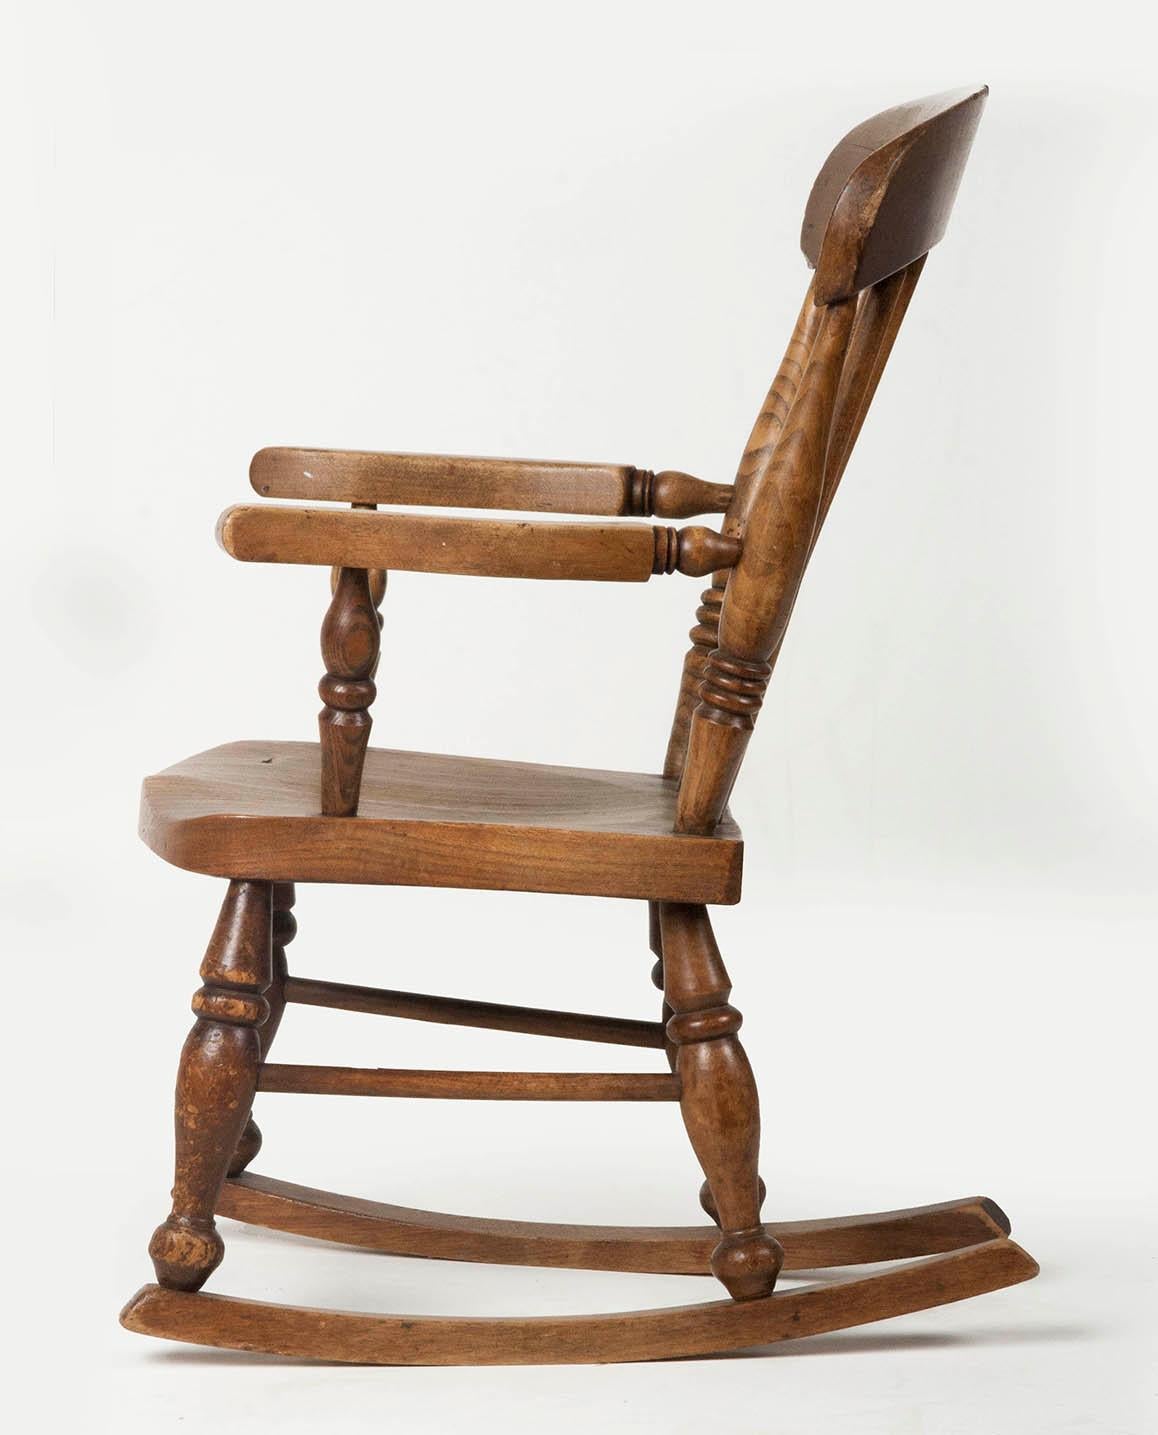 This charming rocking chair is the favourite of every child. Suitable for children from around 2 to 8 years.
The chair was made in England, circa 1900. It is a variant of the well-known English Windsor model.